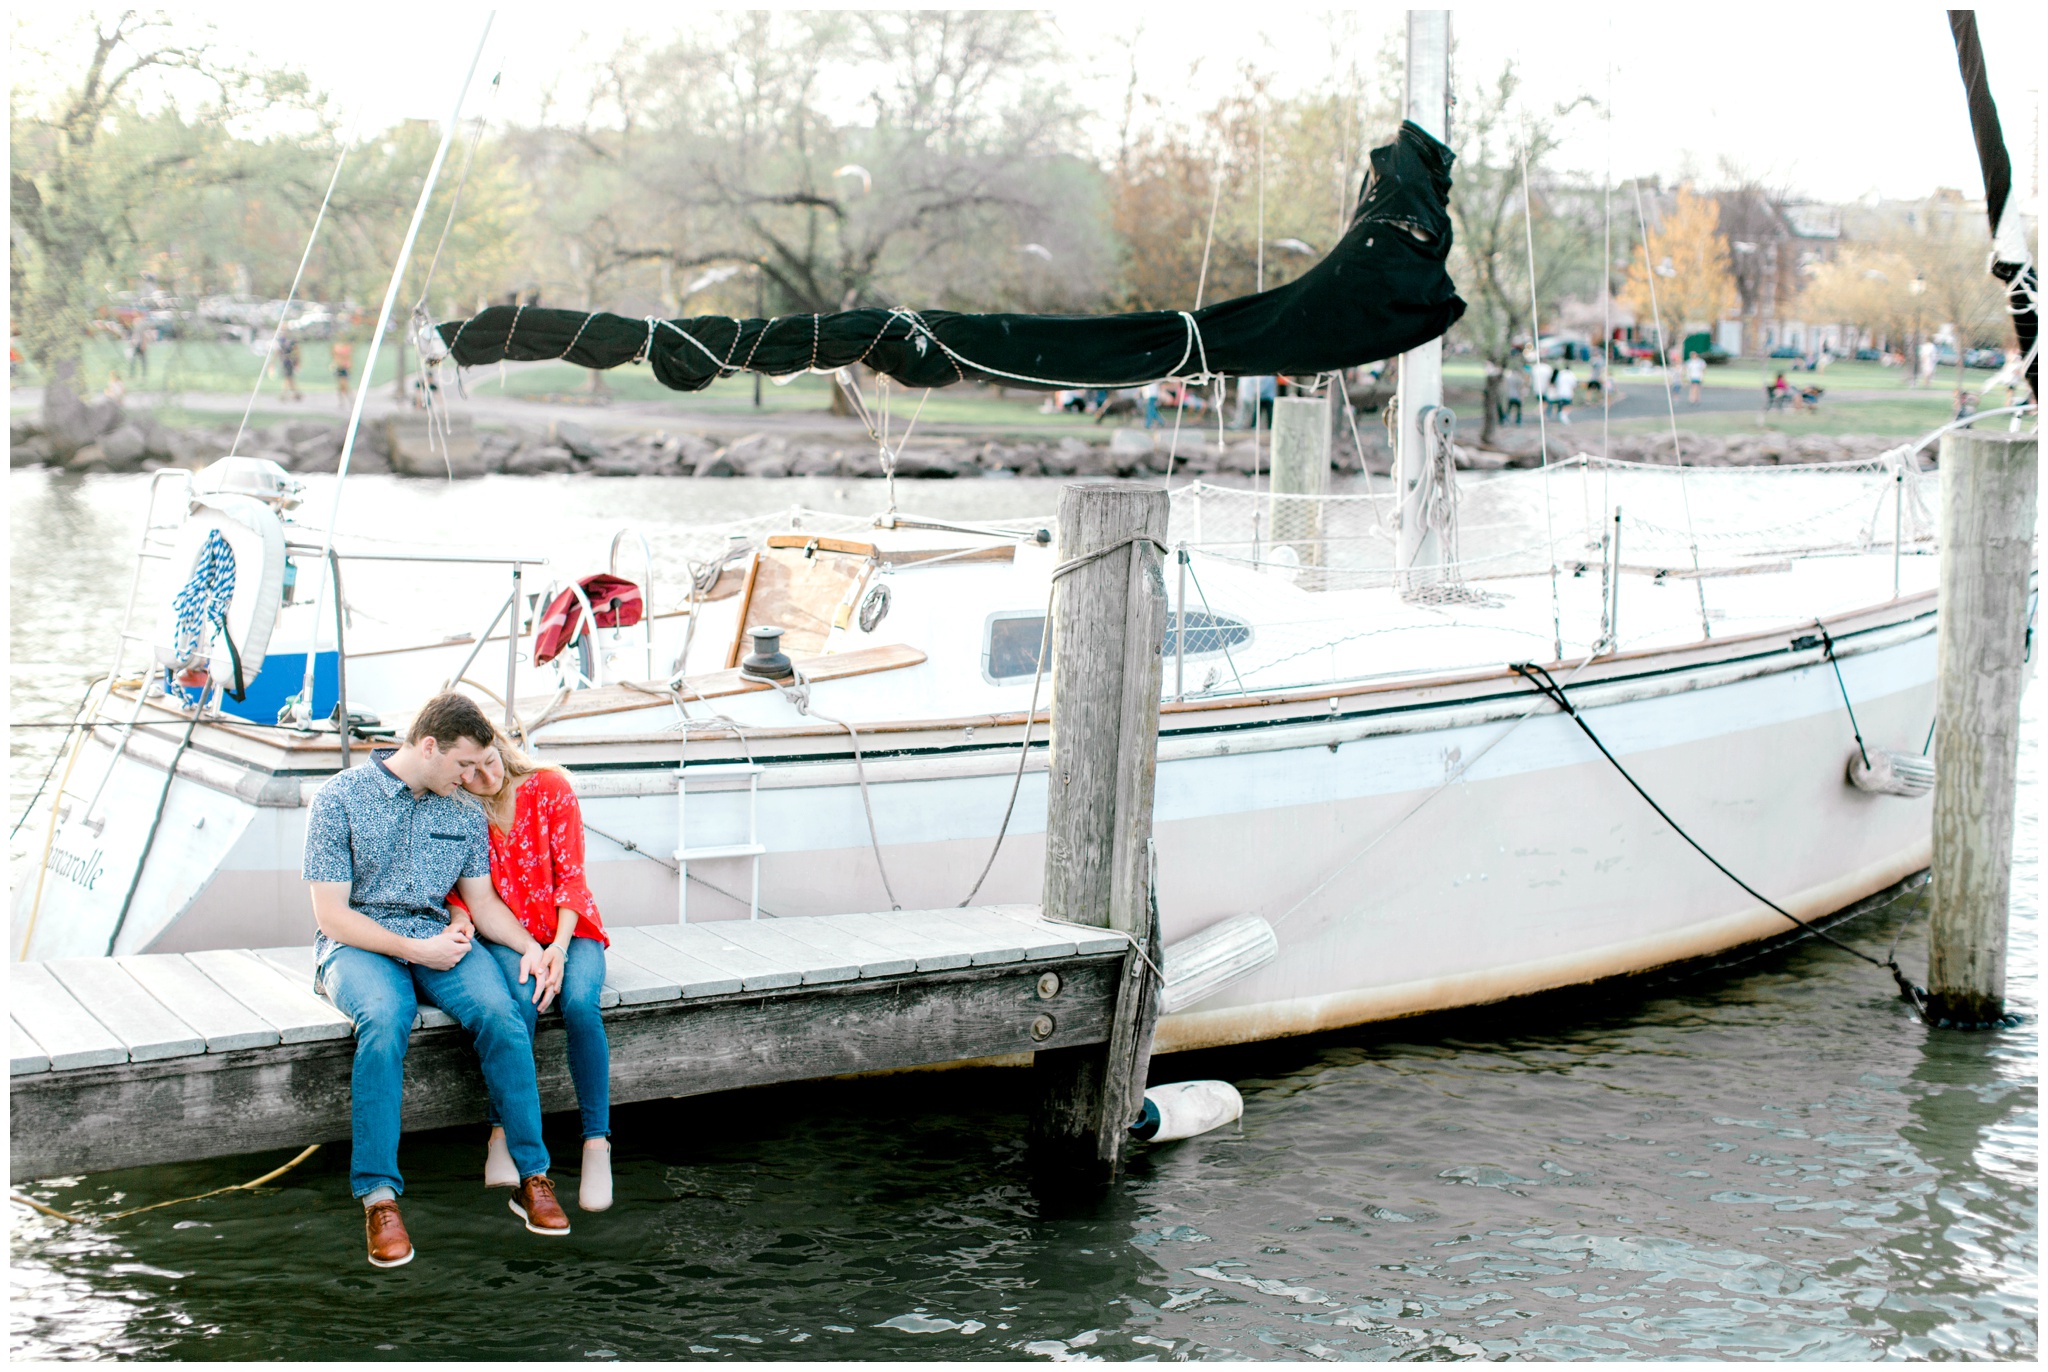 Old town alexandria engagement photos, old town alexandria engagement pictures, old town alexandria photographer, old town alexandria photography, old town alexandria engagement session, engagement photographer, virginia engagement photographer, virginia wedding photographer